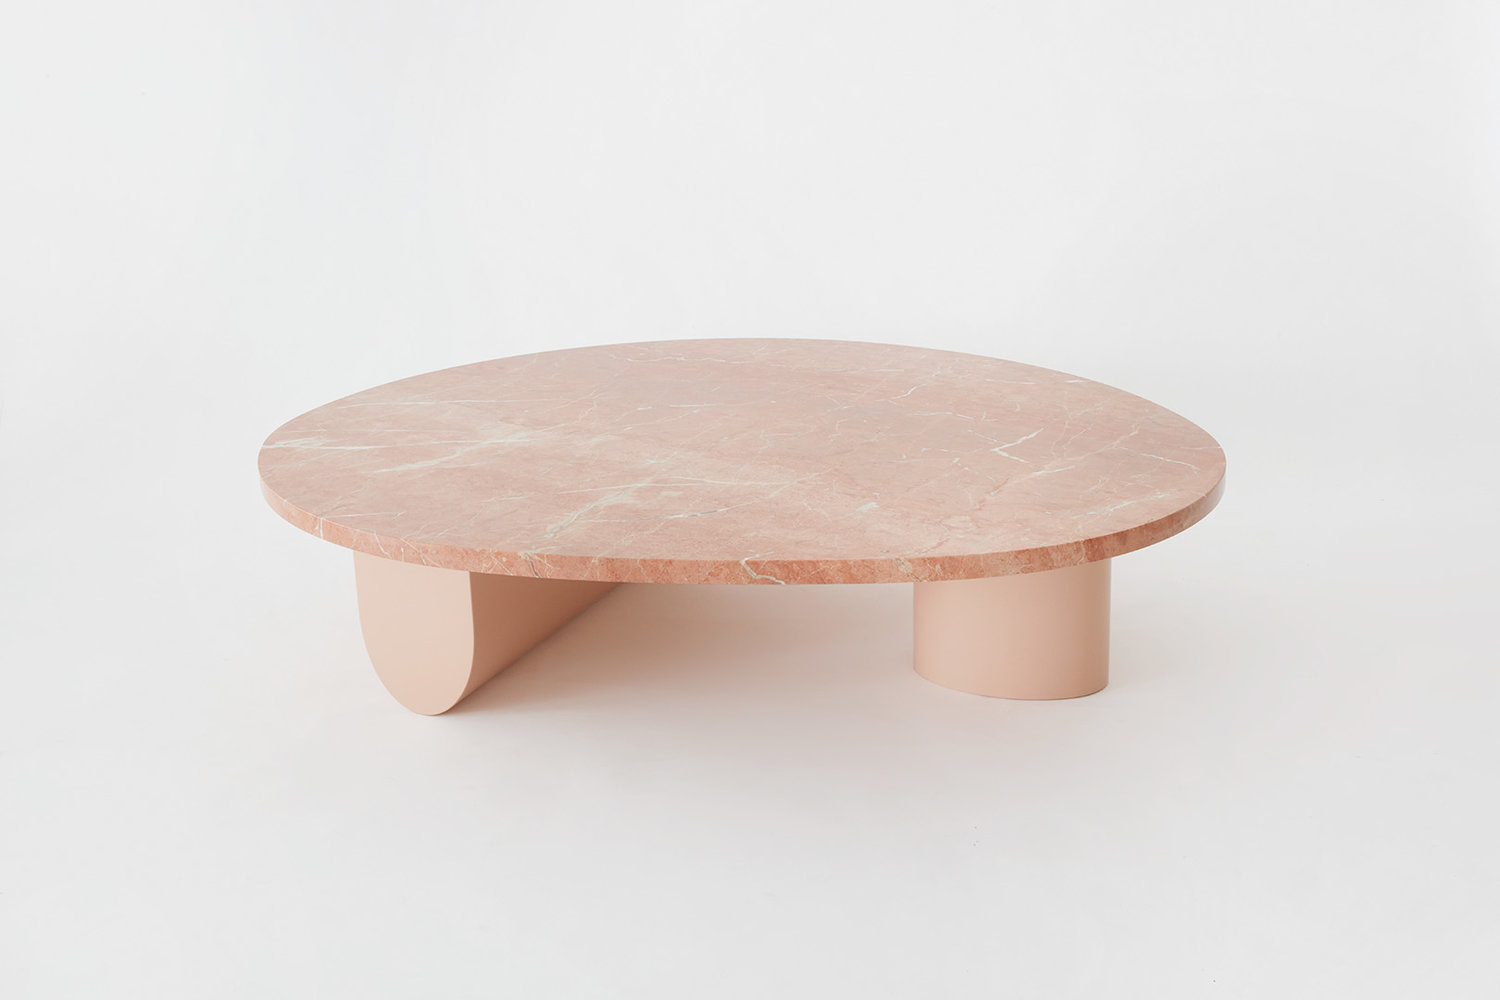 NYCxDesign 2019 Top 10 Best Exhibitions and Installations to Admire - Egg Collective - Isla Coffee Table nycxdesign NYCxDesign 2019: Top 10 Best Exhibitions and Installations to Admire NYCxDesign 2019 Top 10 Best Exhibitions and Installations to Admire Egg Collective Isla Coffee Table